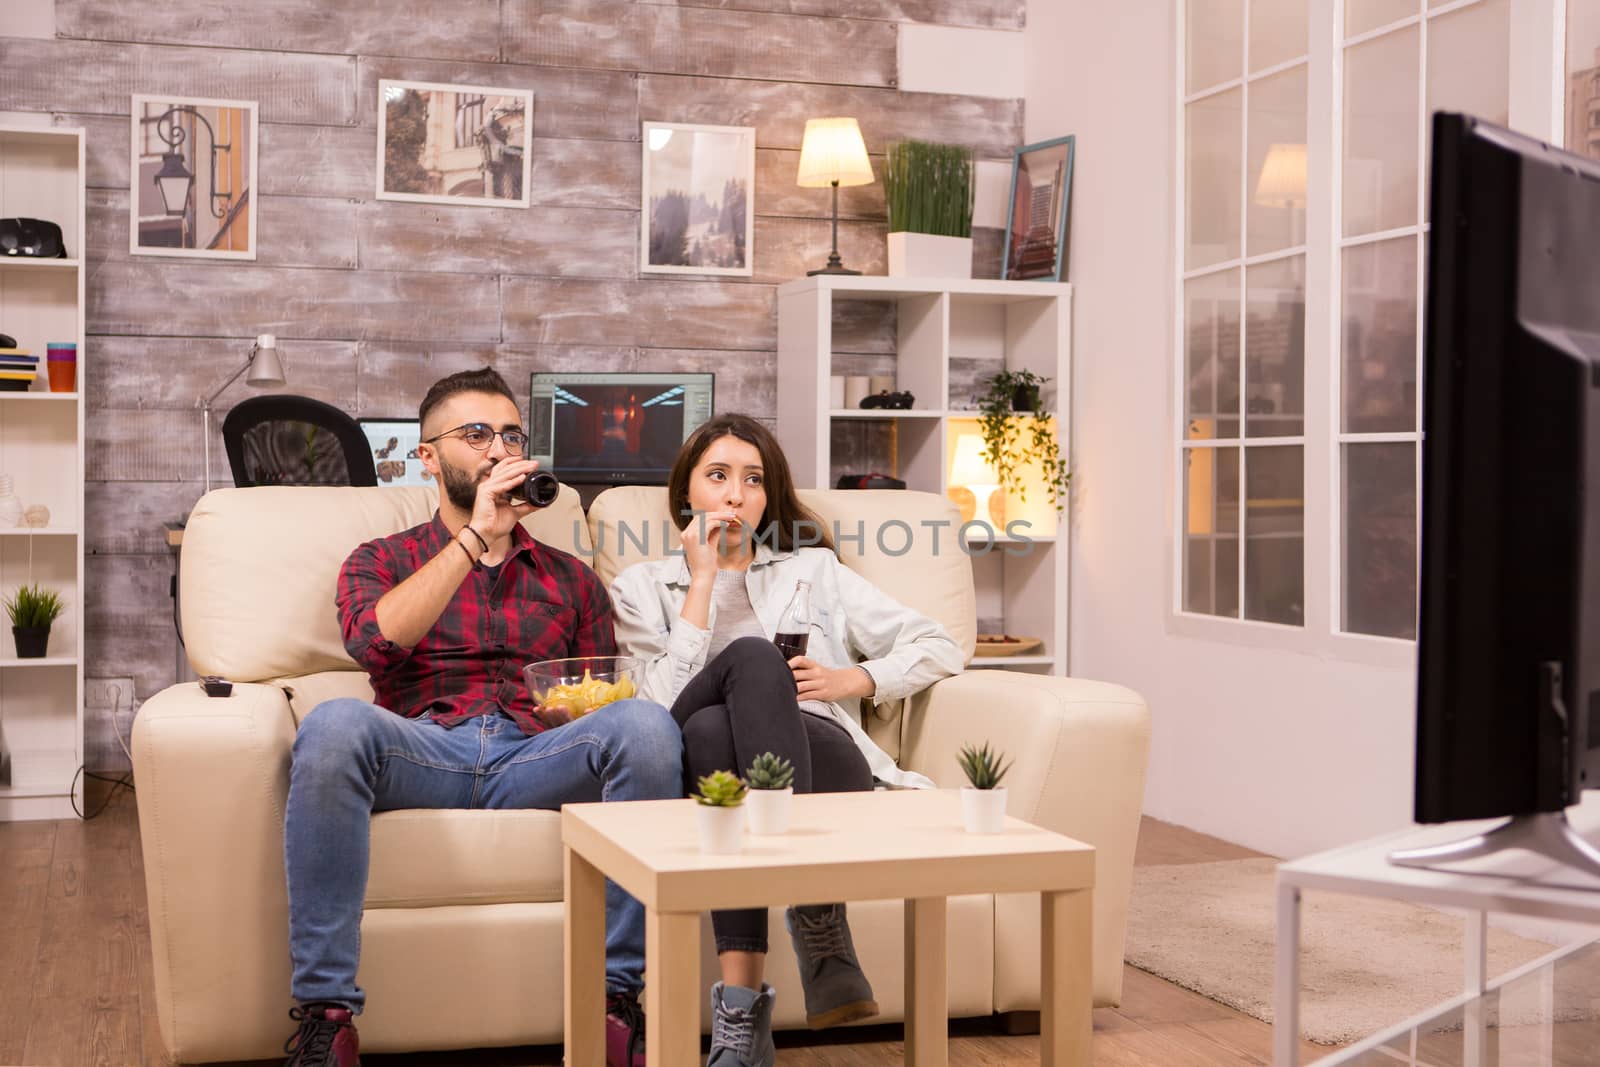 Beautiful young couple drinking soda and eating chips while watching a movie on tv sitting on couch.